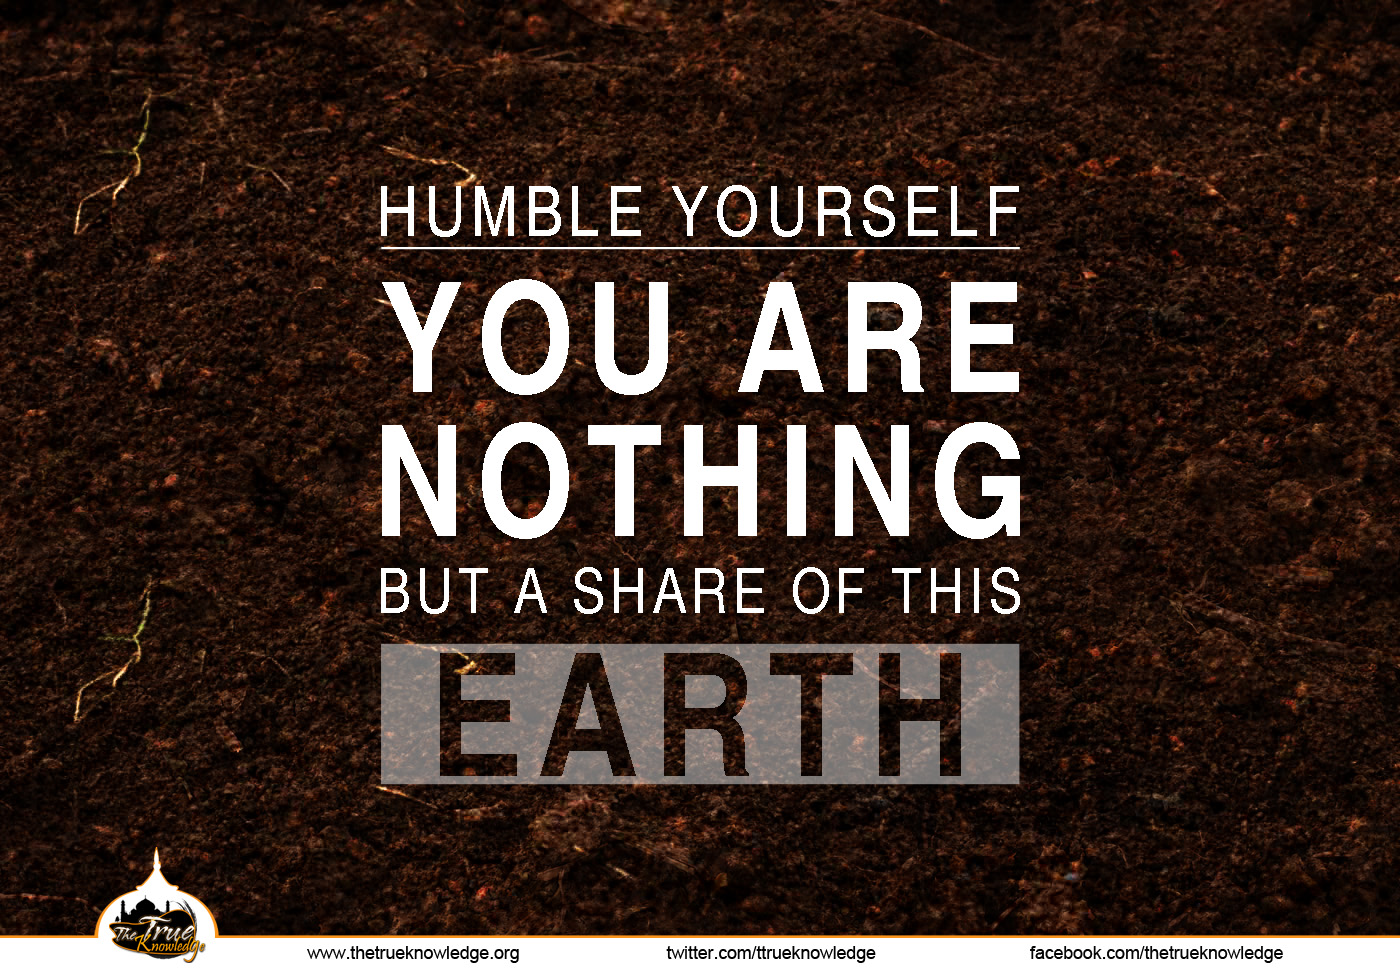 Earth - Islamic Quotes On Humility - HD Wallpaper 